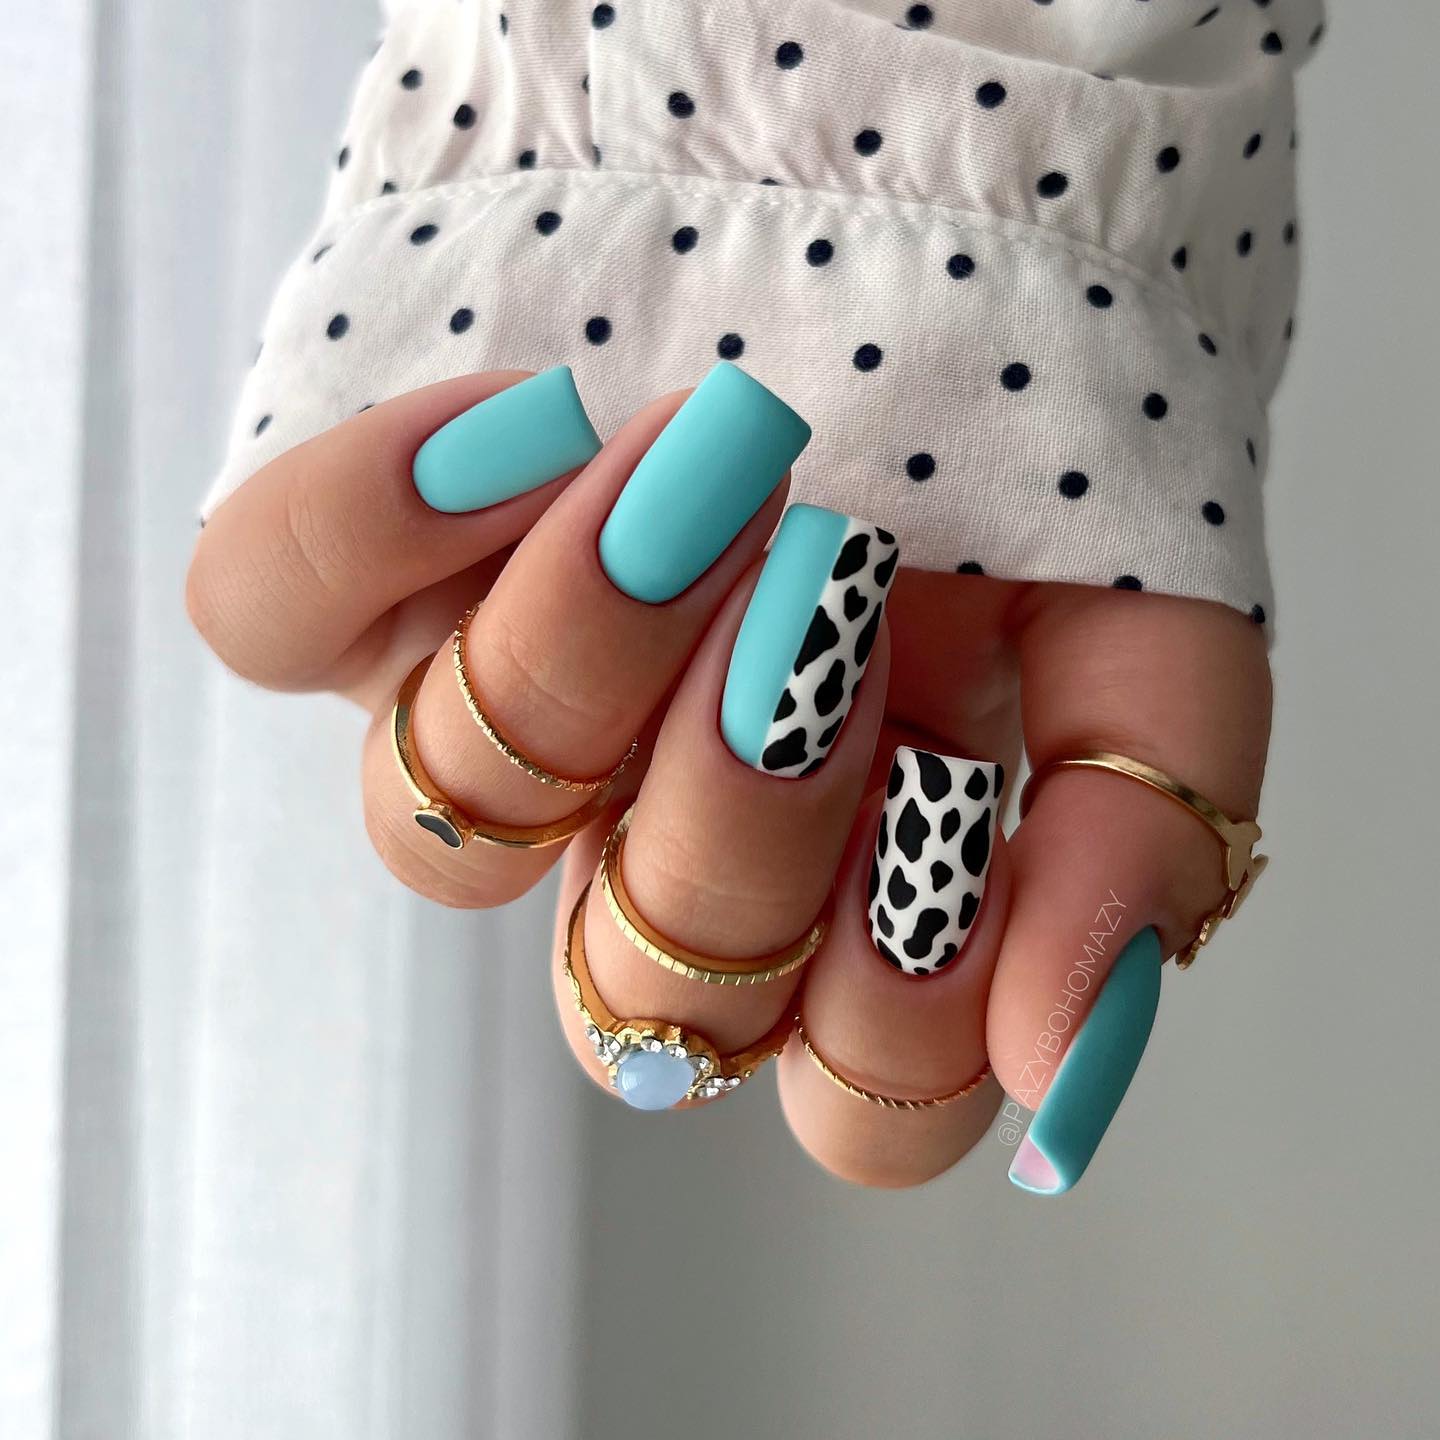 Matte Blue Nails with Black and White Cow Print